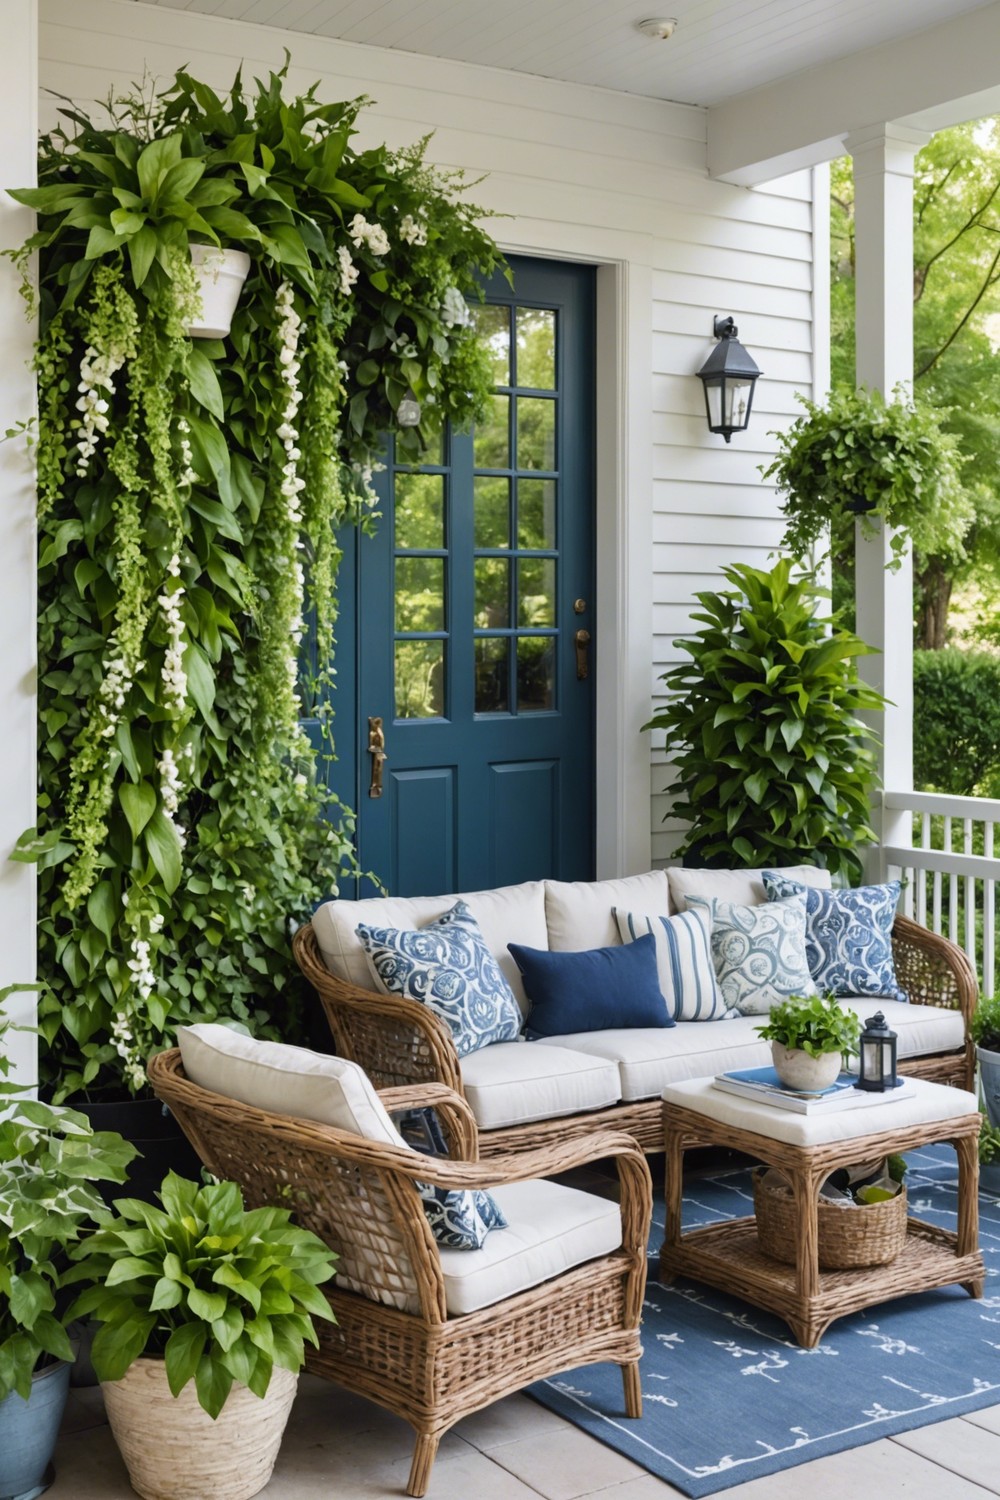 Create a Refreshing Outdoor Space